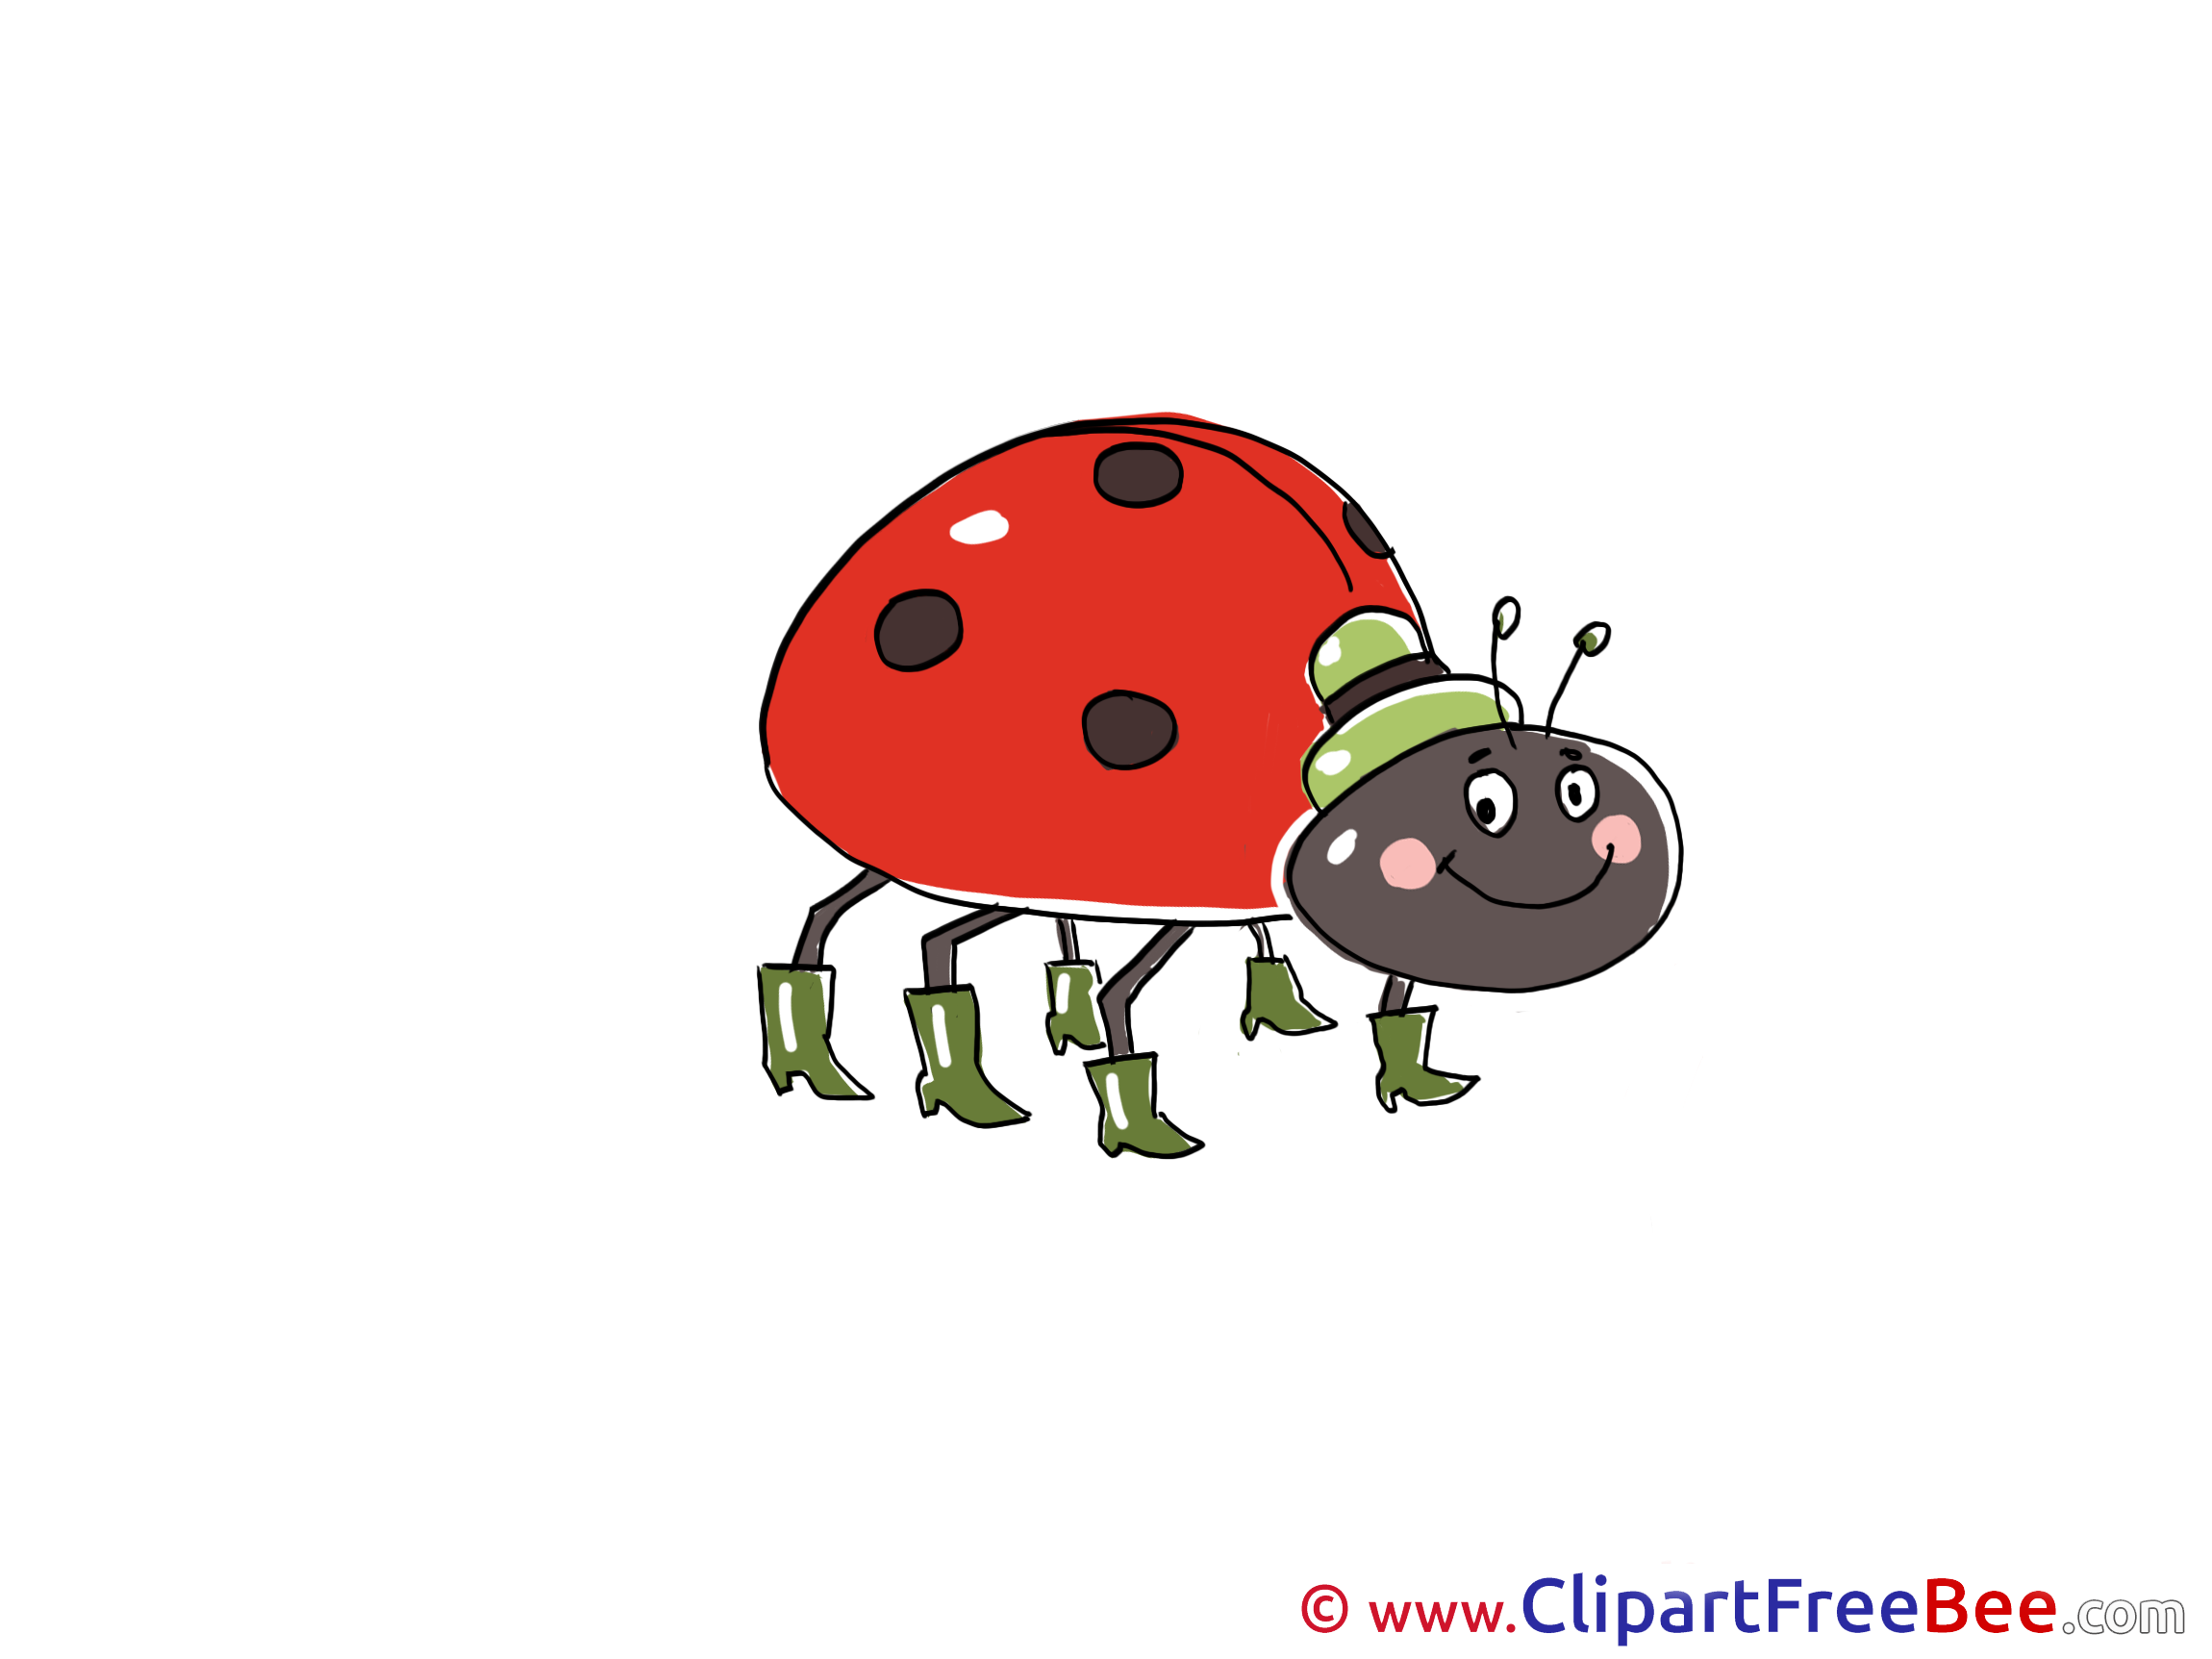 Ladybug free Cliparts for download